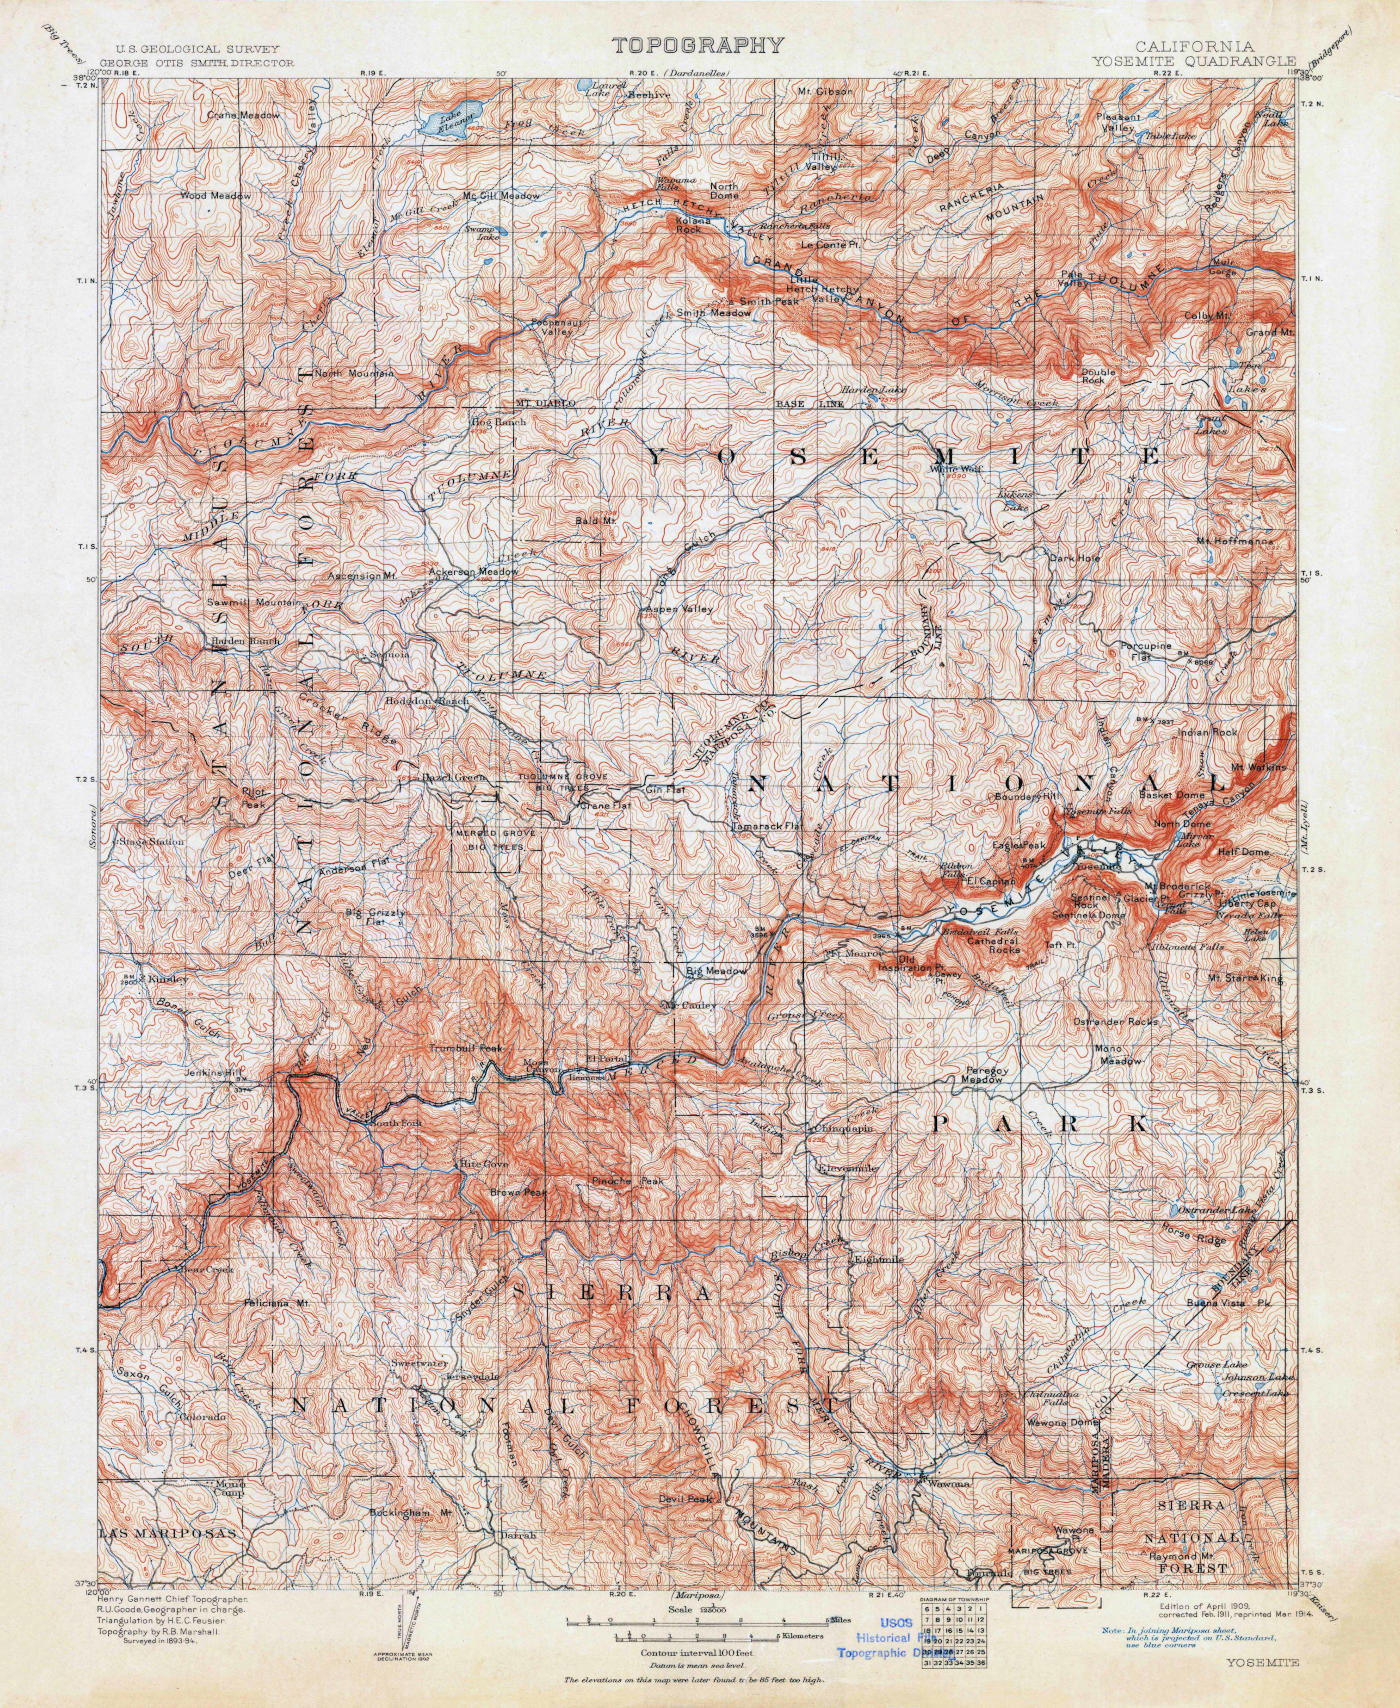 A historical USGS map of Yosemite National Park showing the topographic and riparian features of the landscape as they were in 1909.